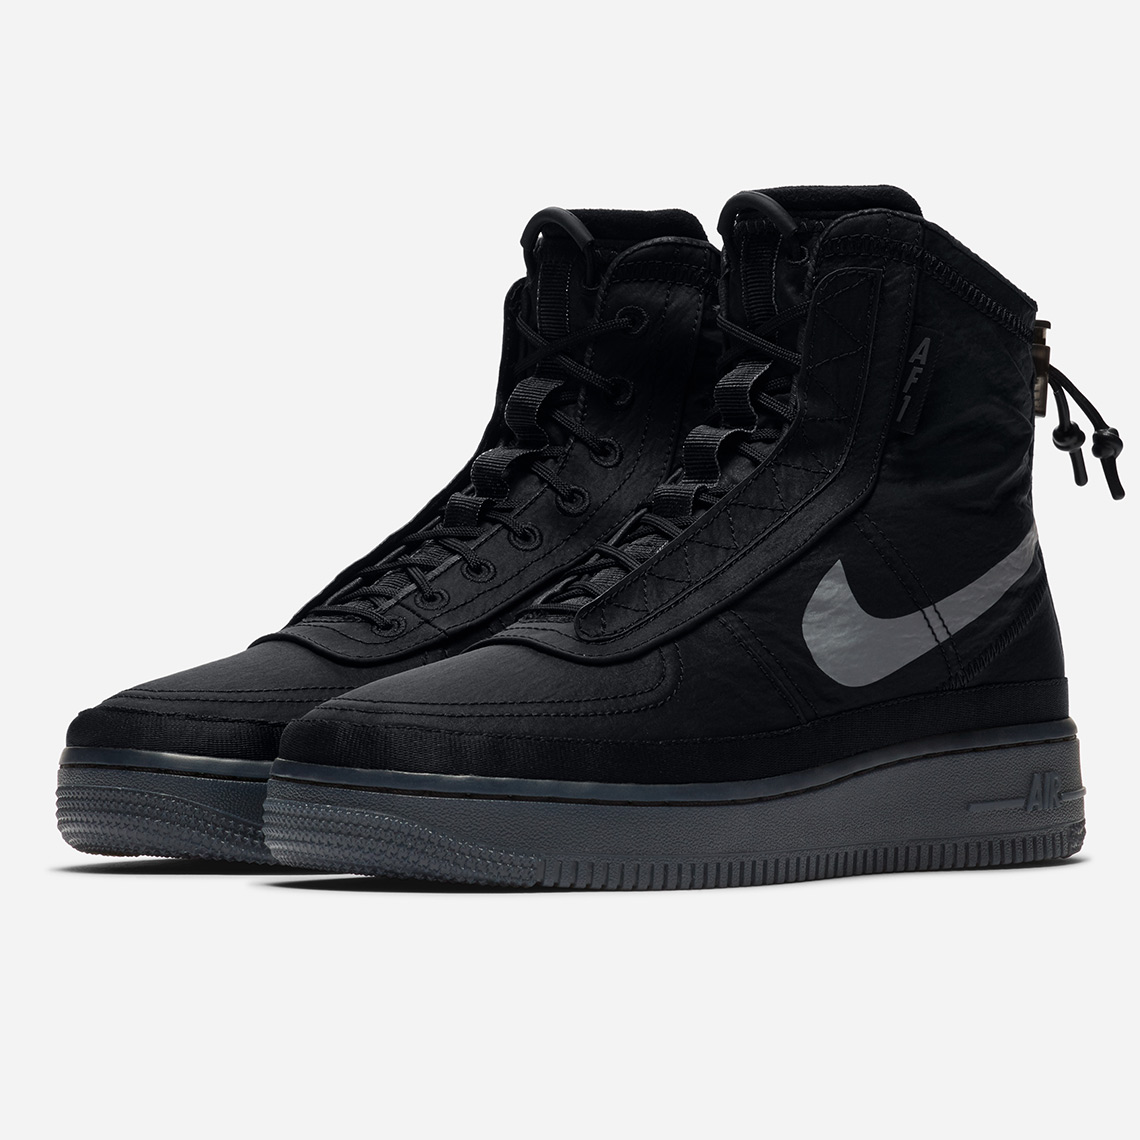 Nike Air Force 1 Low Fall 2019 Release Info | SneakerNews.com